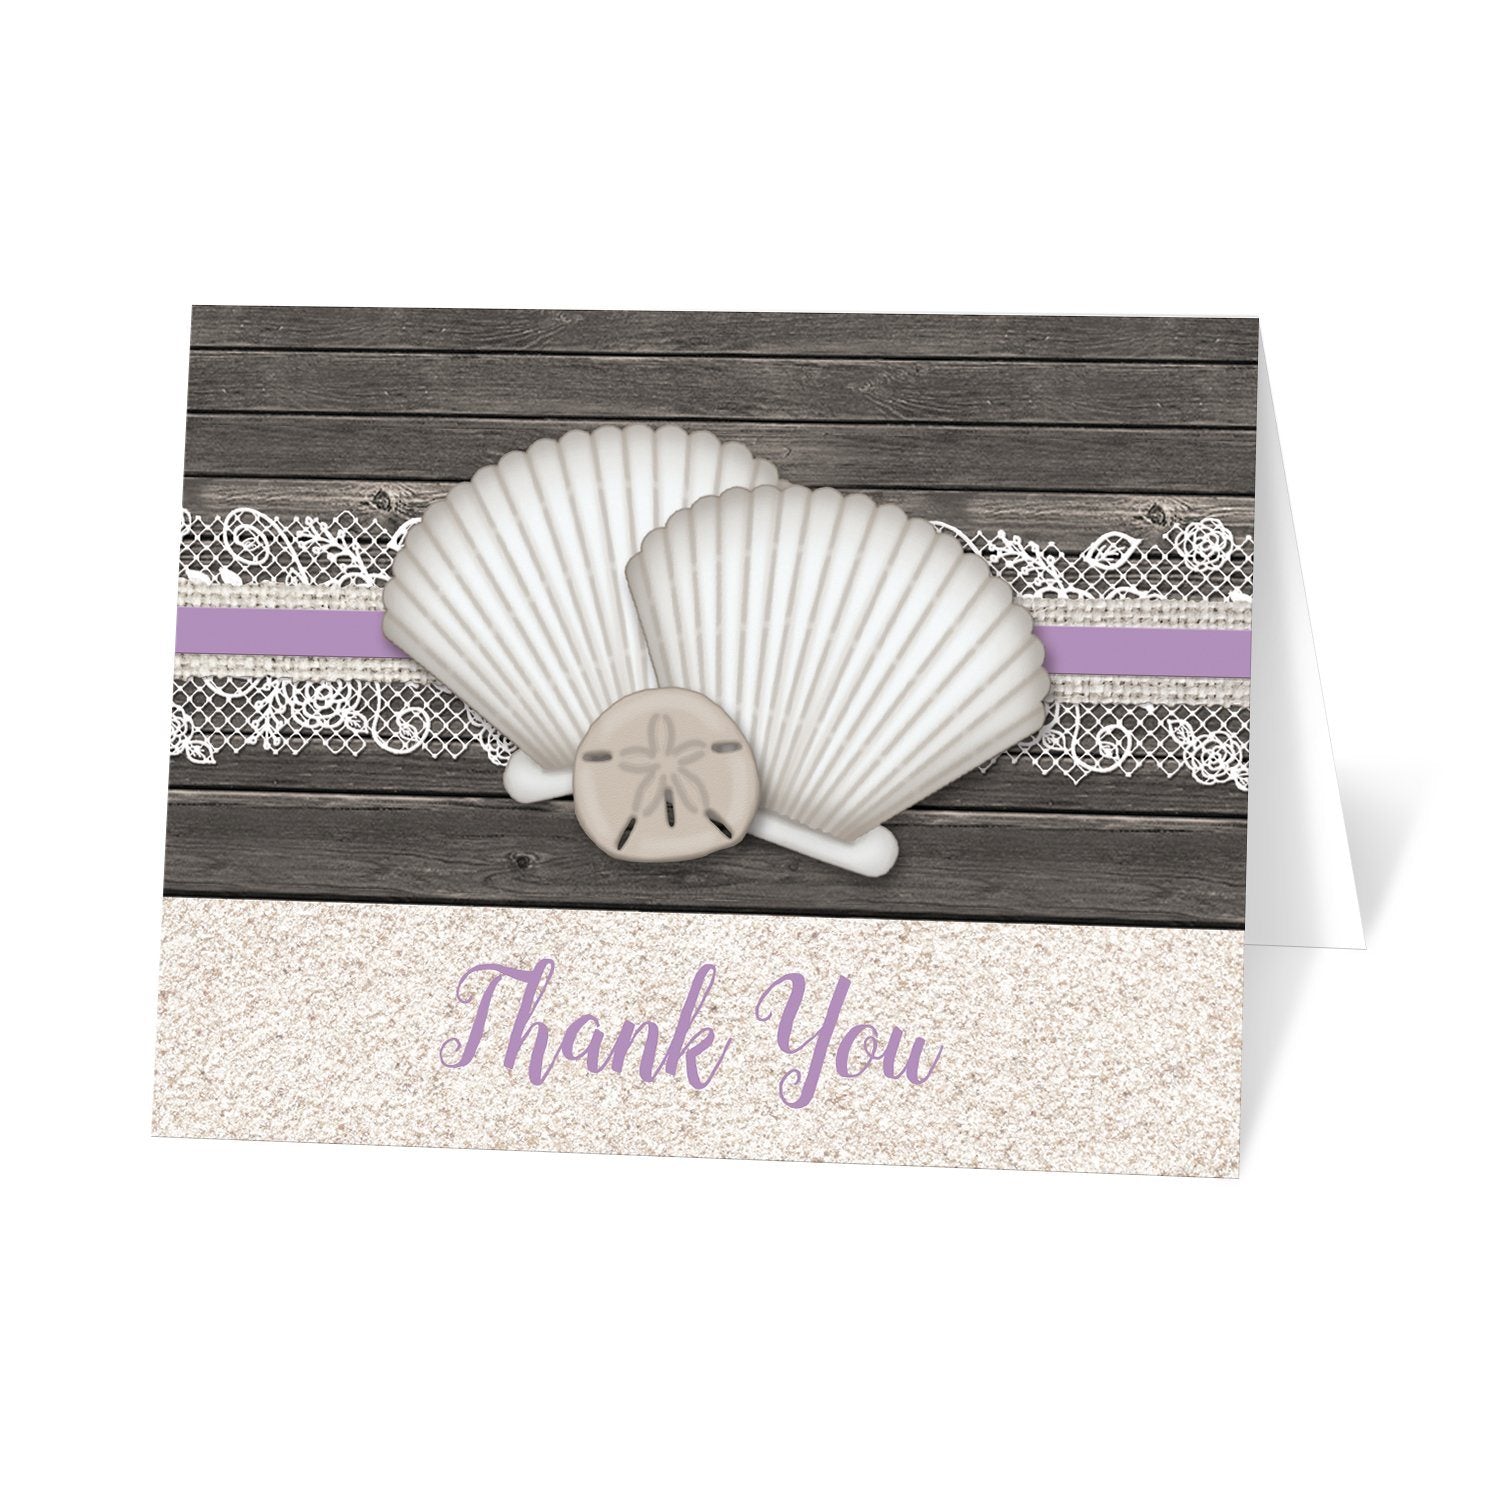 Seashell Lace Wood and Sand Purple Beach Thank You Cards at Artistically Invited